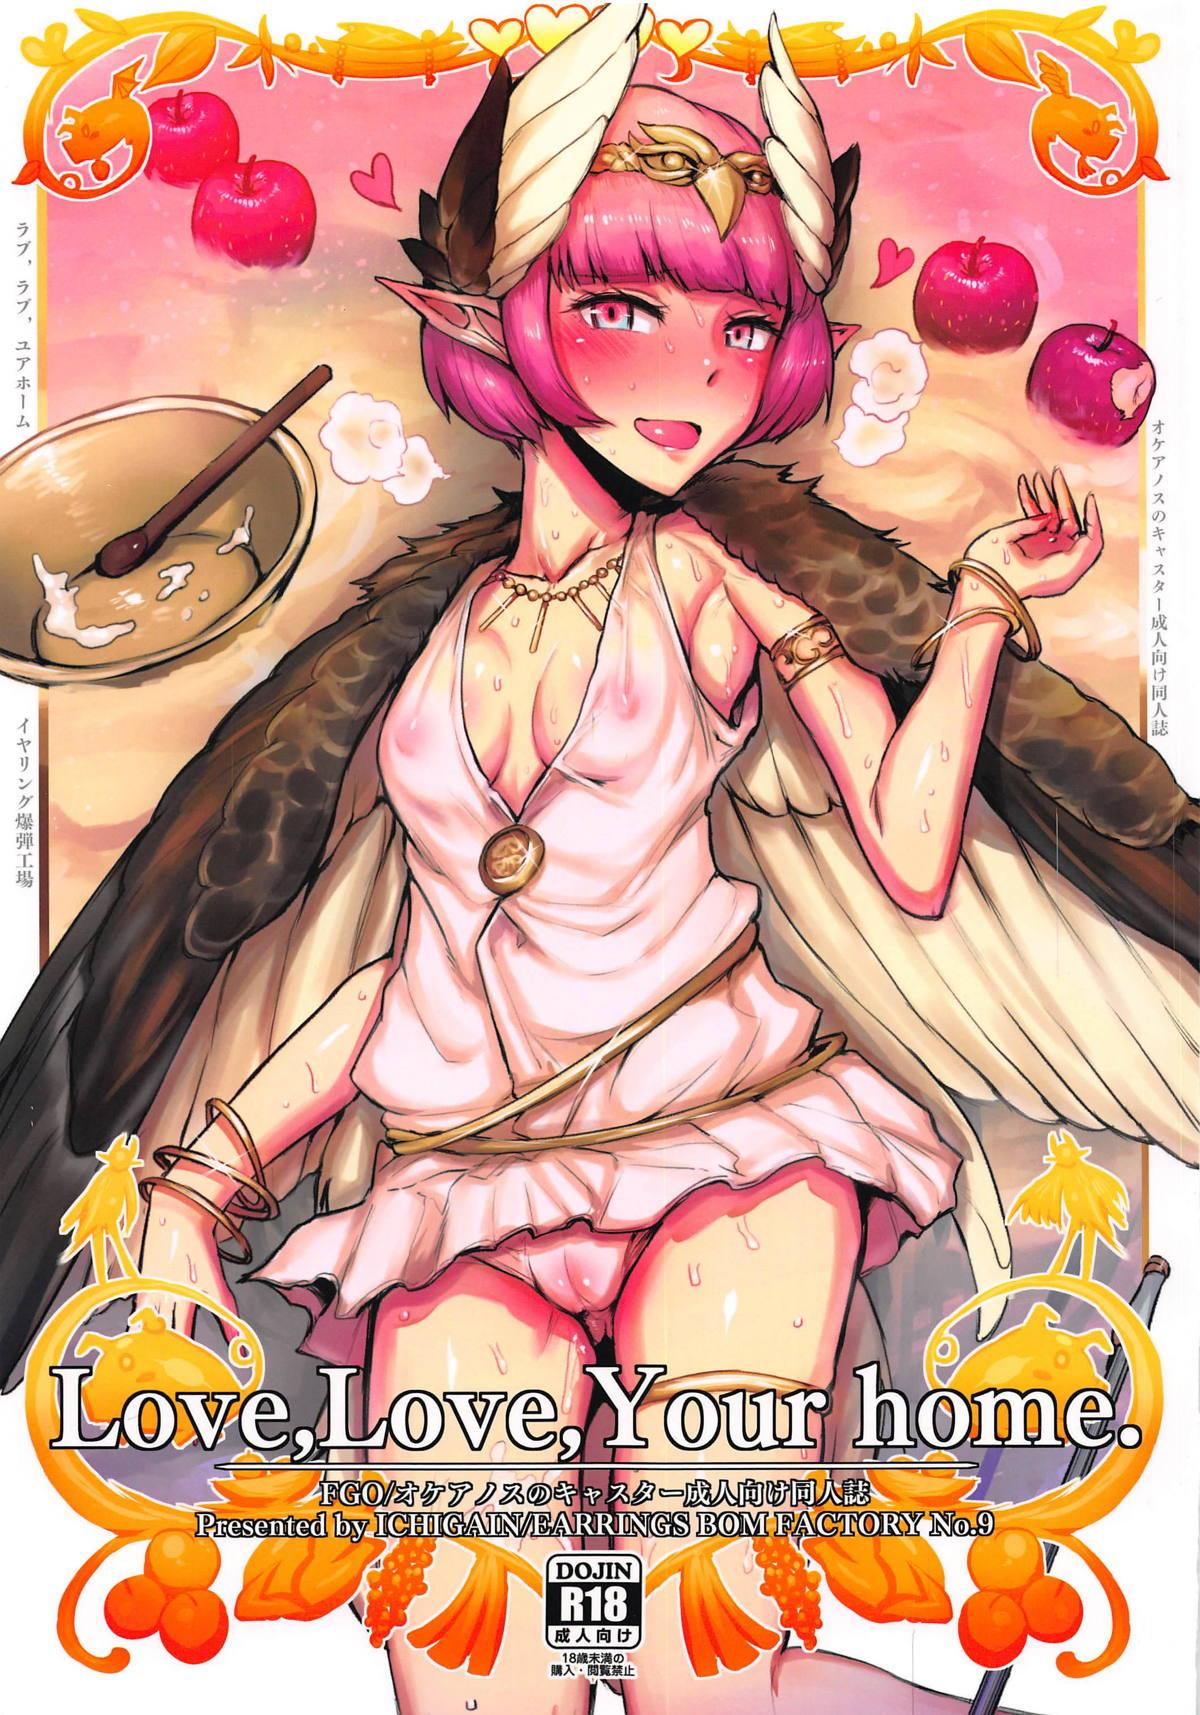 Banho Love, Love, Your home. - Fate grand order Telugu - Page 1